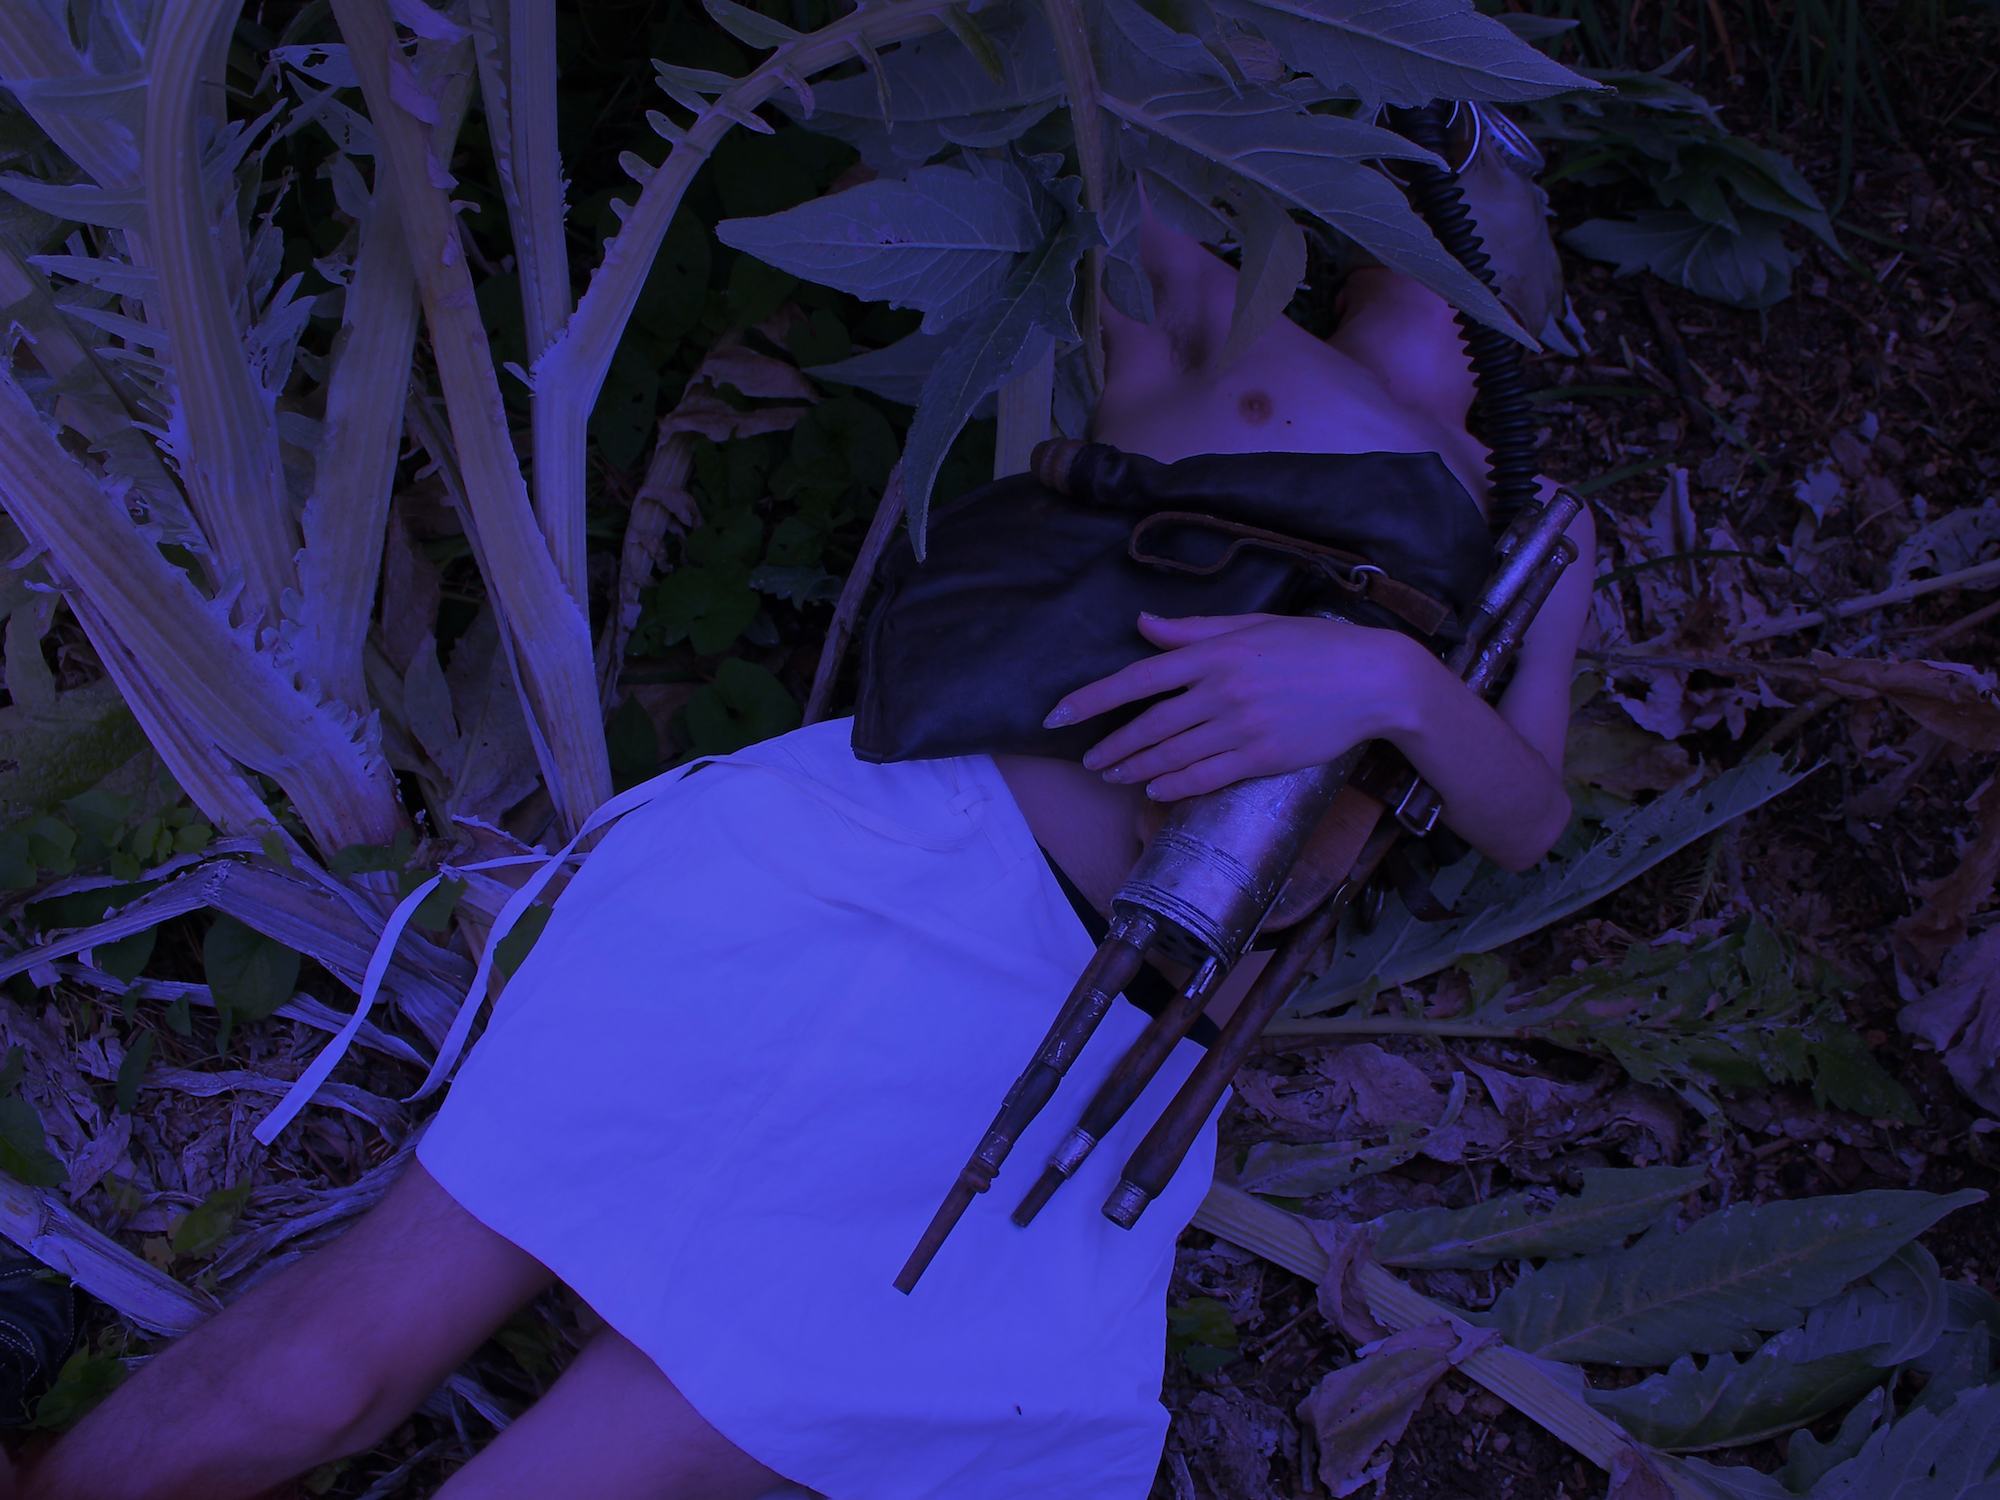 An animatronic doll lies in the grass in this artwork by felicita of PC Music